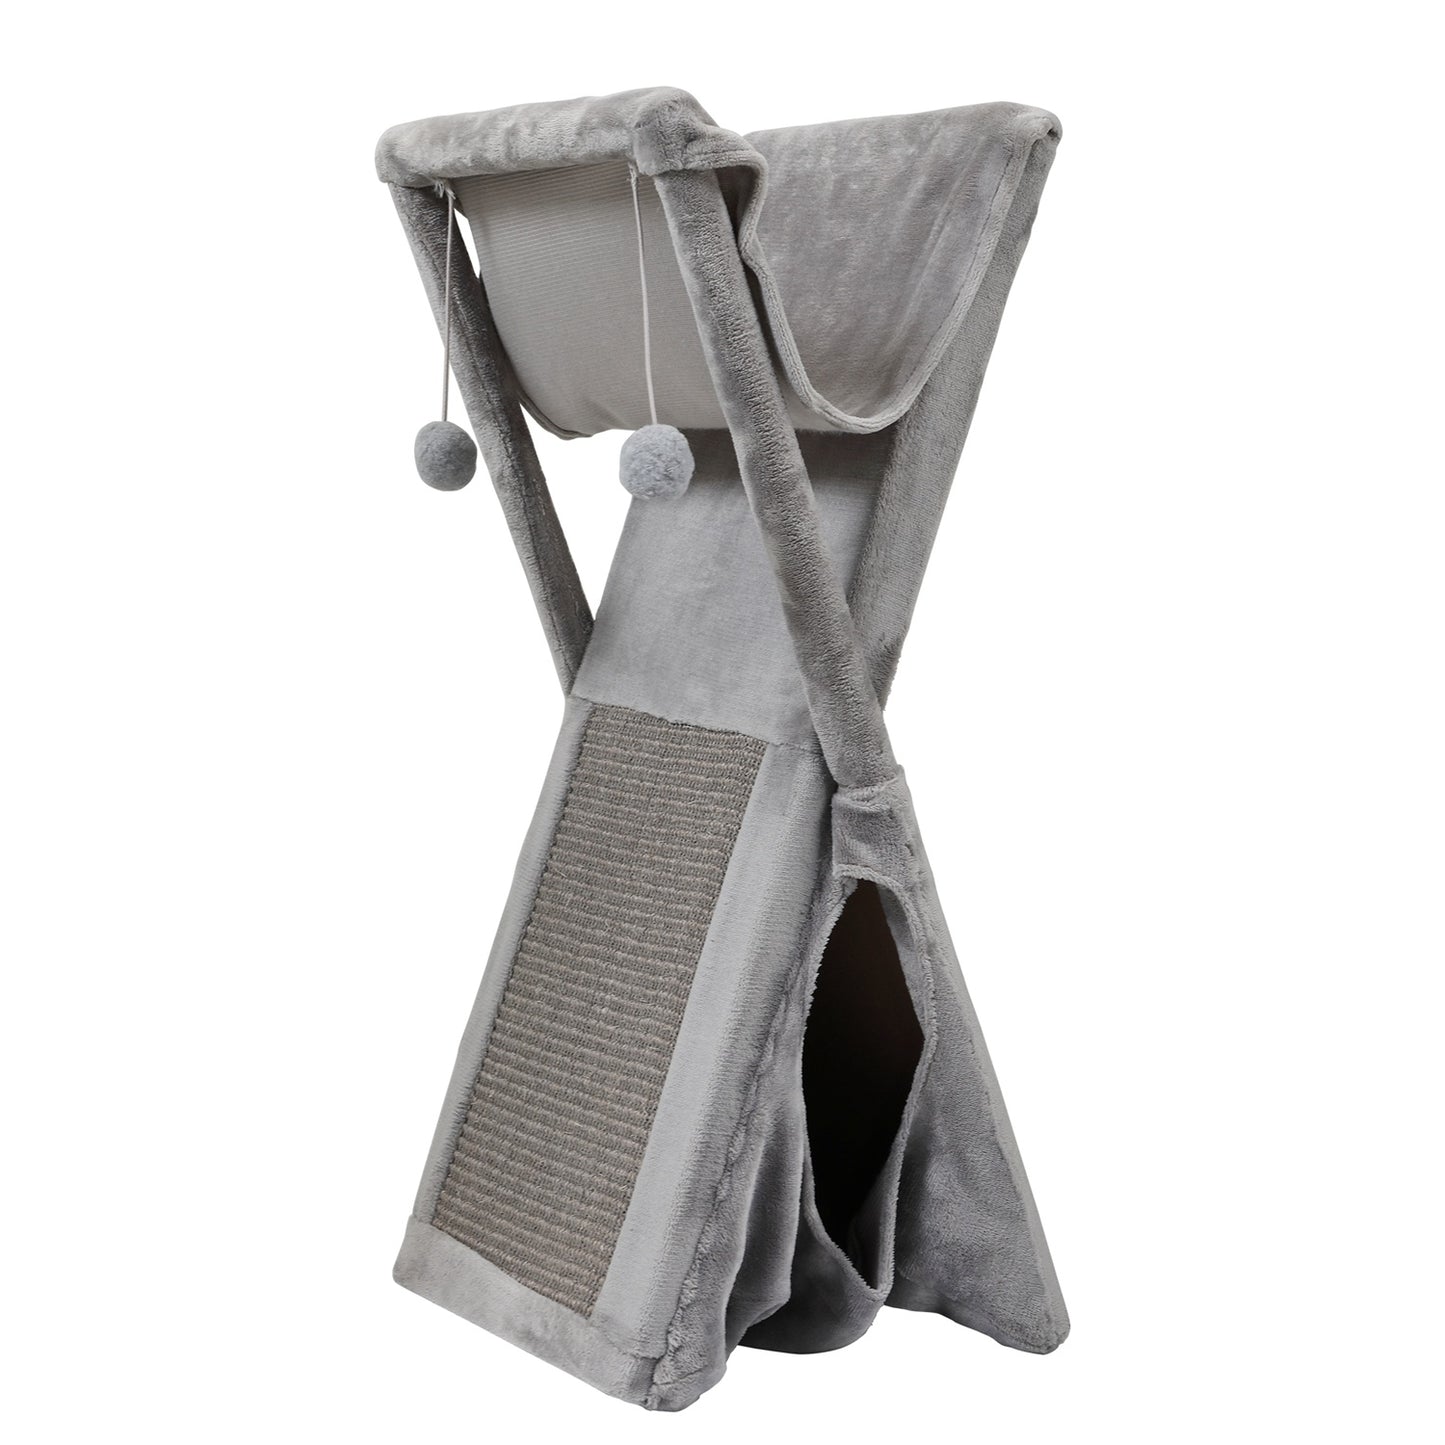 Folding Cat Tower Tree, 2-Tier Pet House with Scratching Pad, Cat Nest Hammock for Small to Middle Kitten - Gray XH